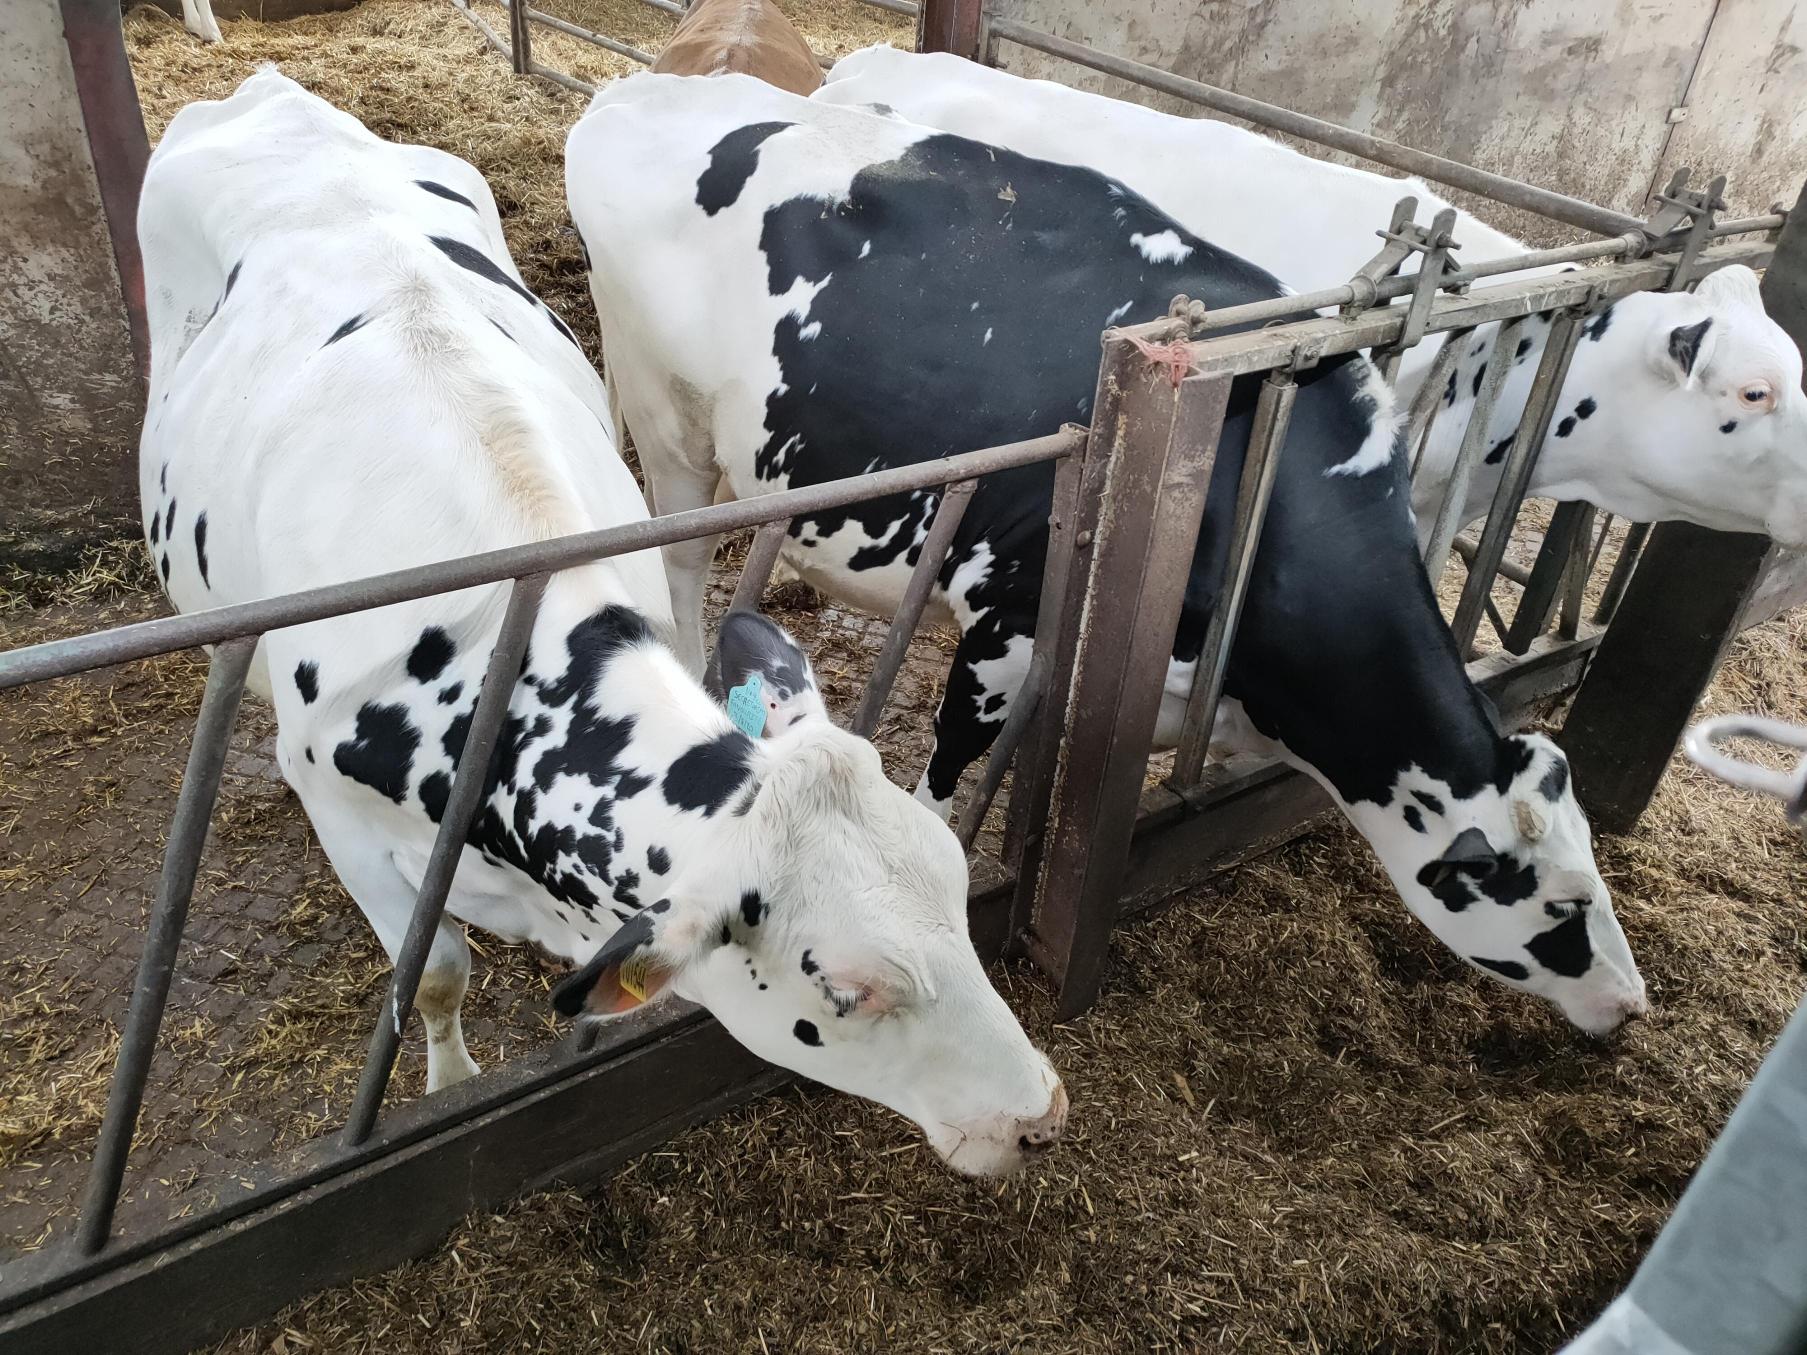 Cows eating from a feed trough.